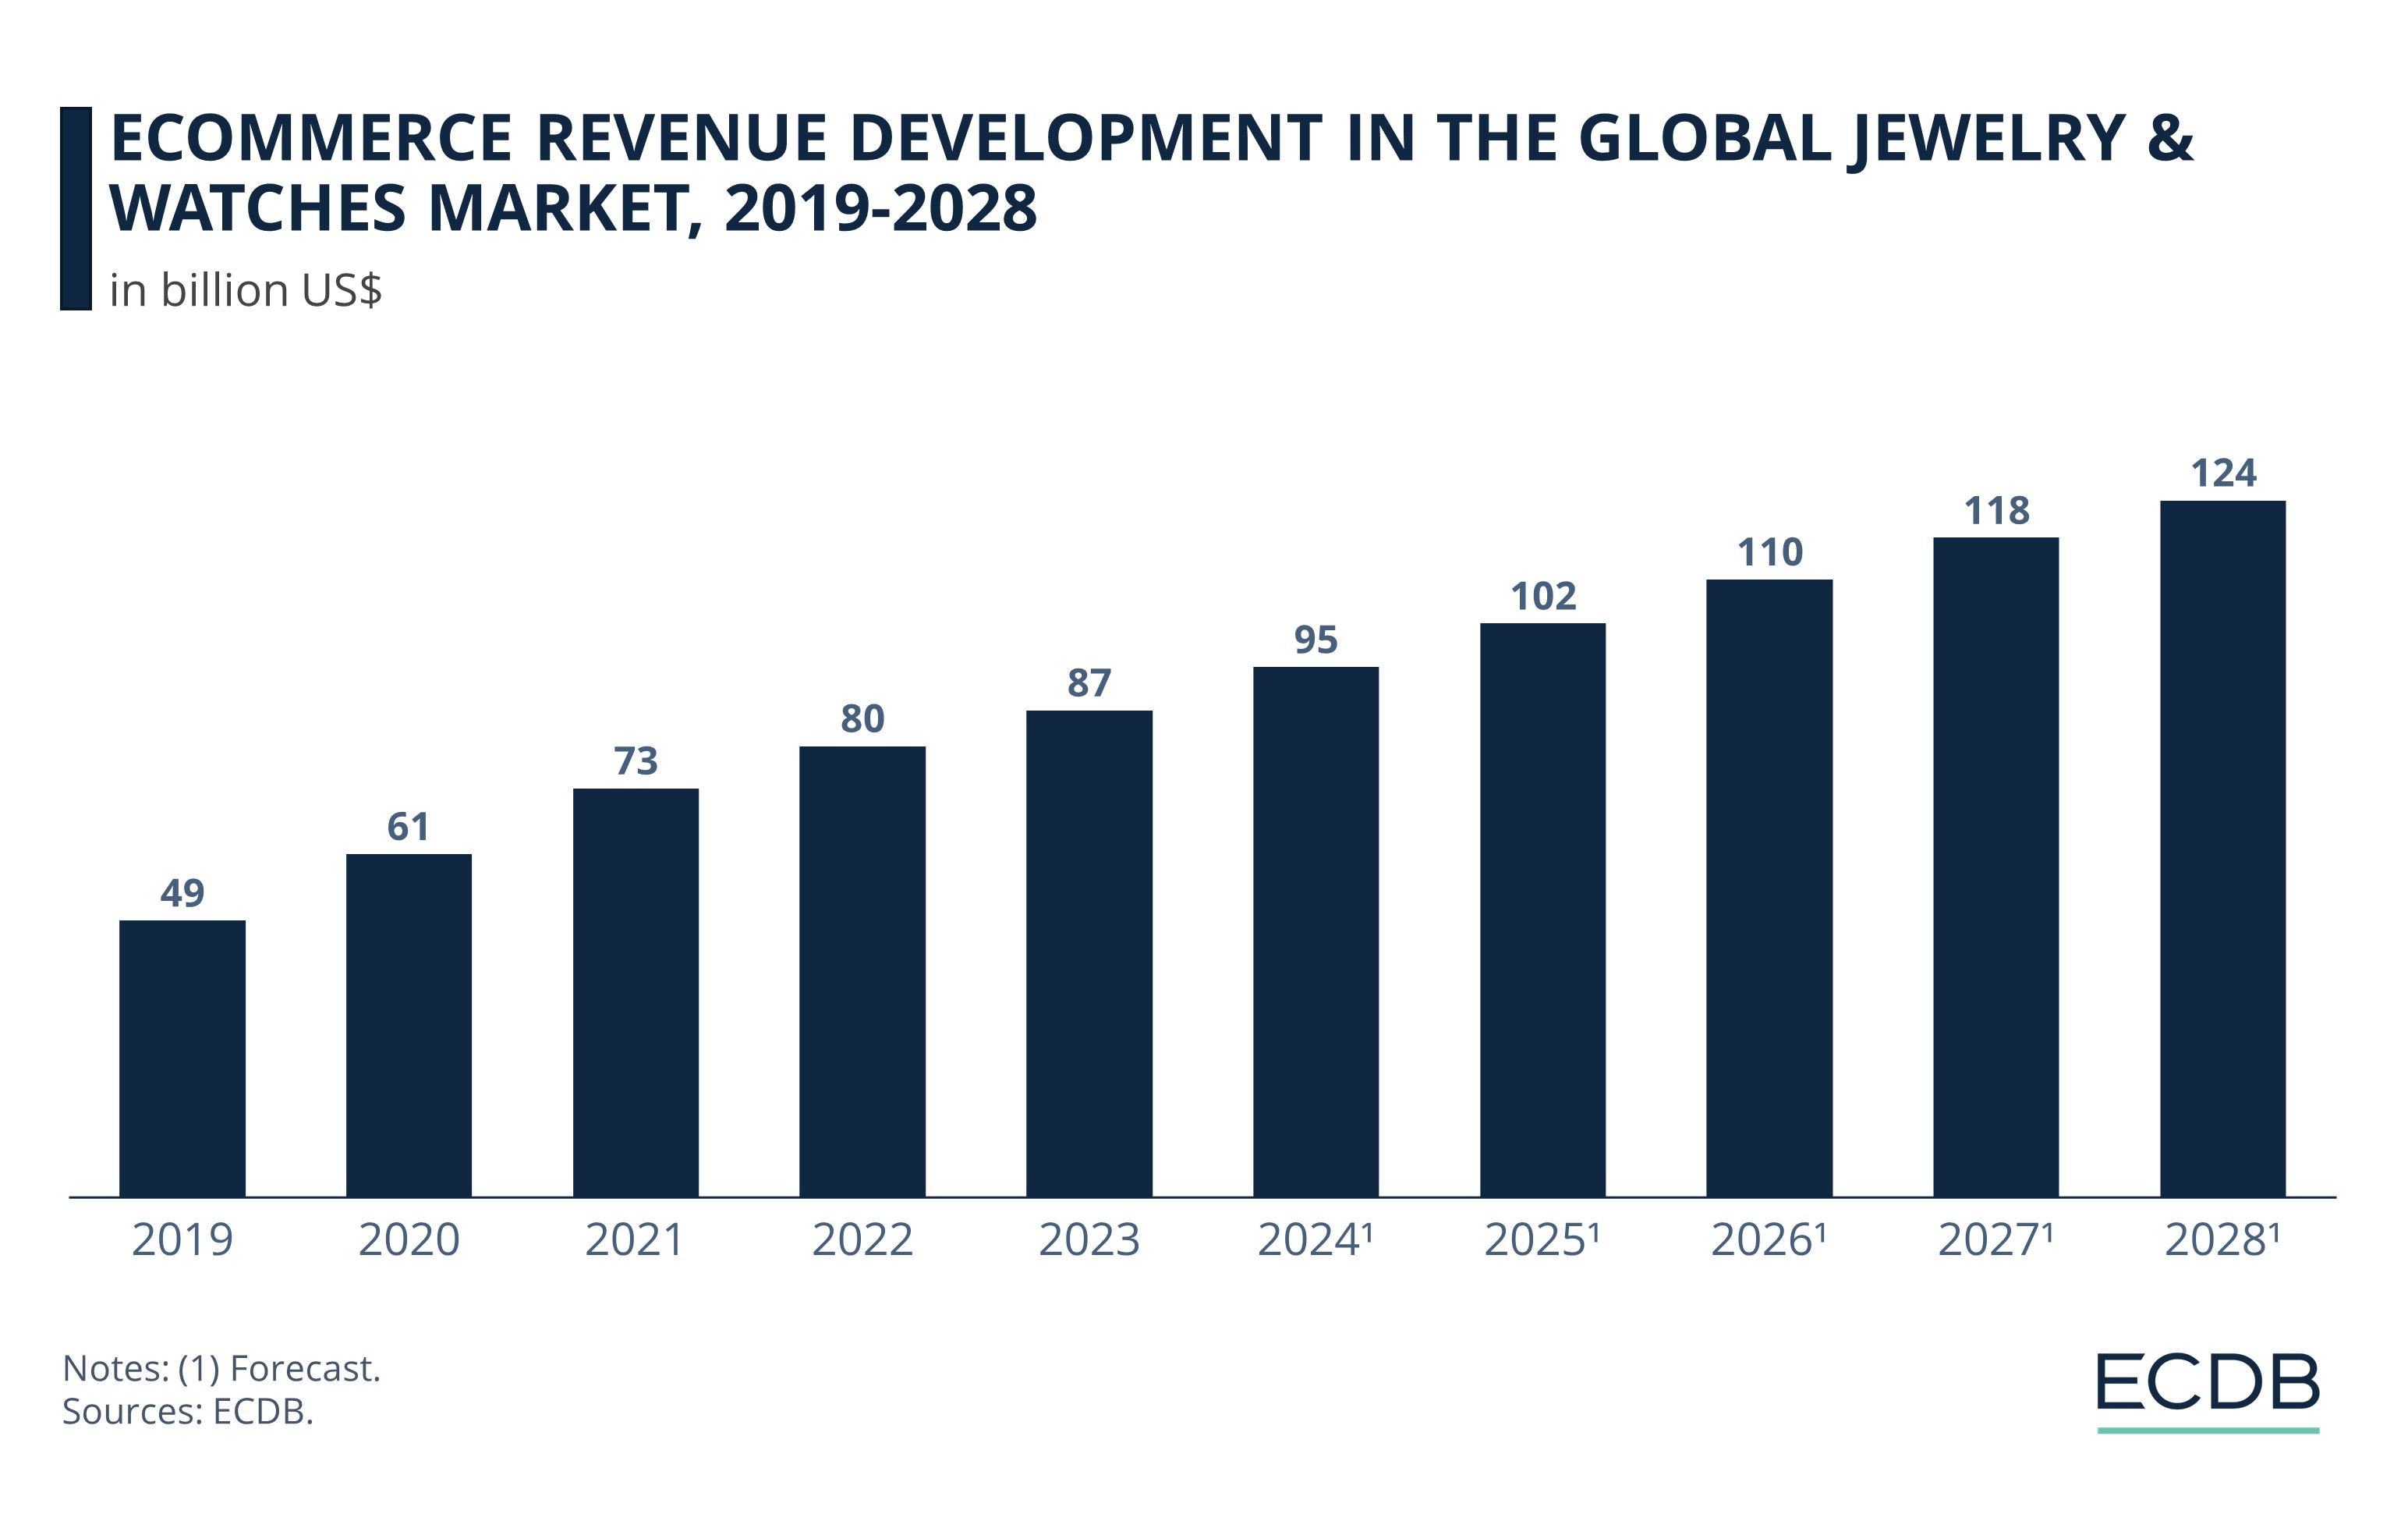 Ecommerce Revenue Development in the Global Jewelry & Watches Market, 2019-2028